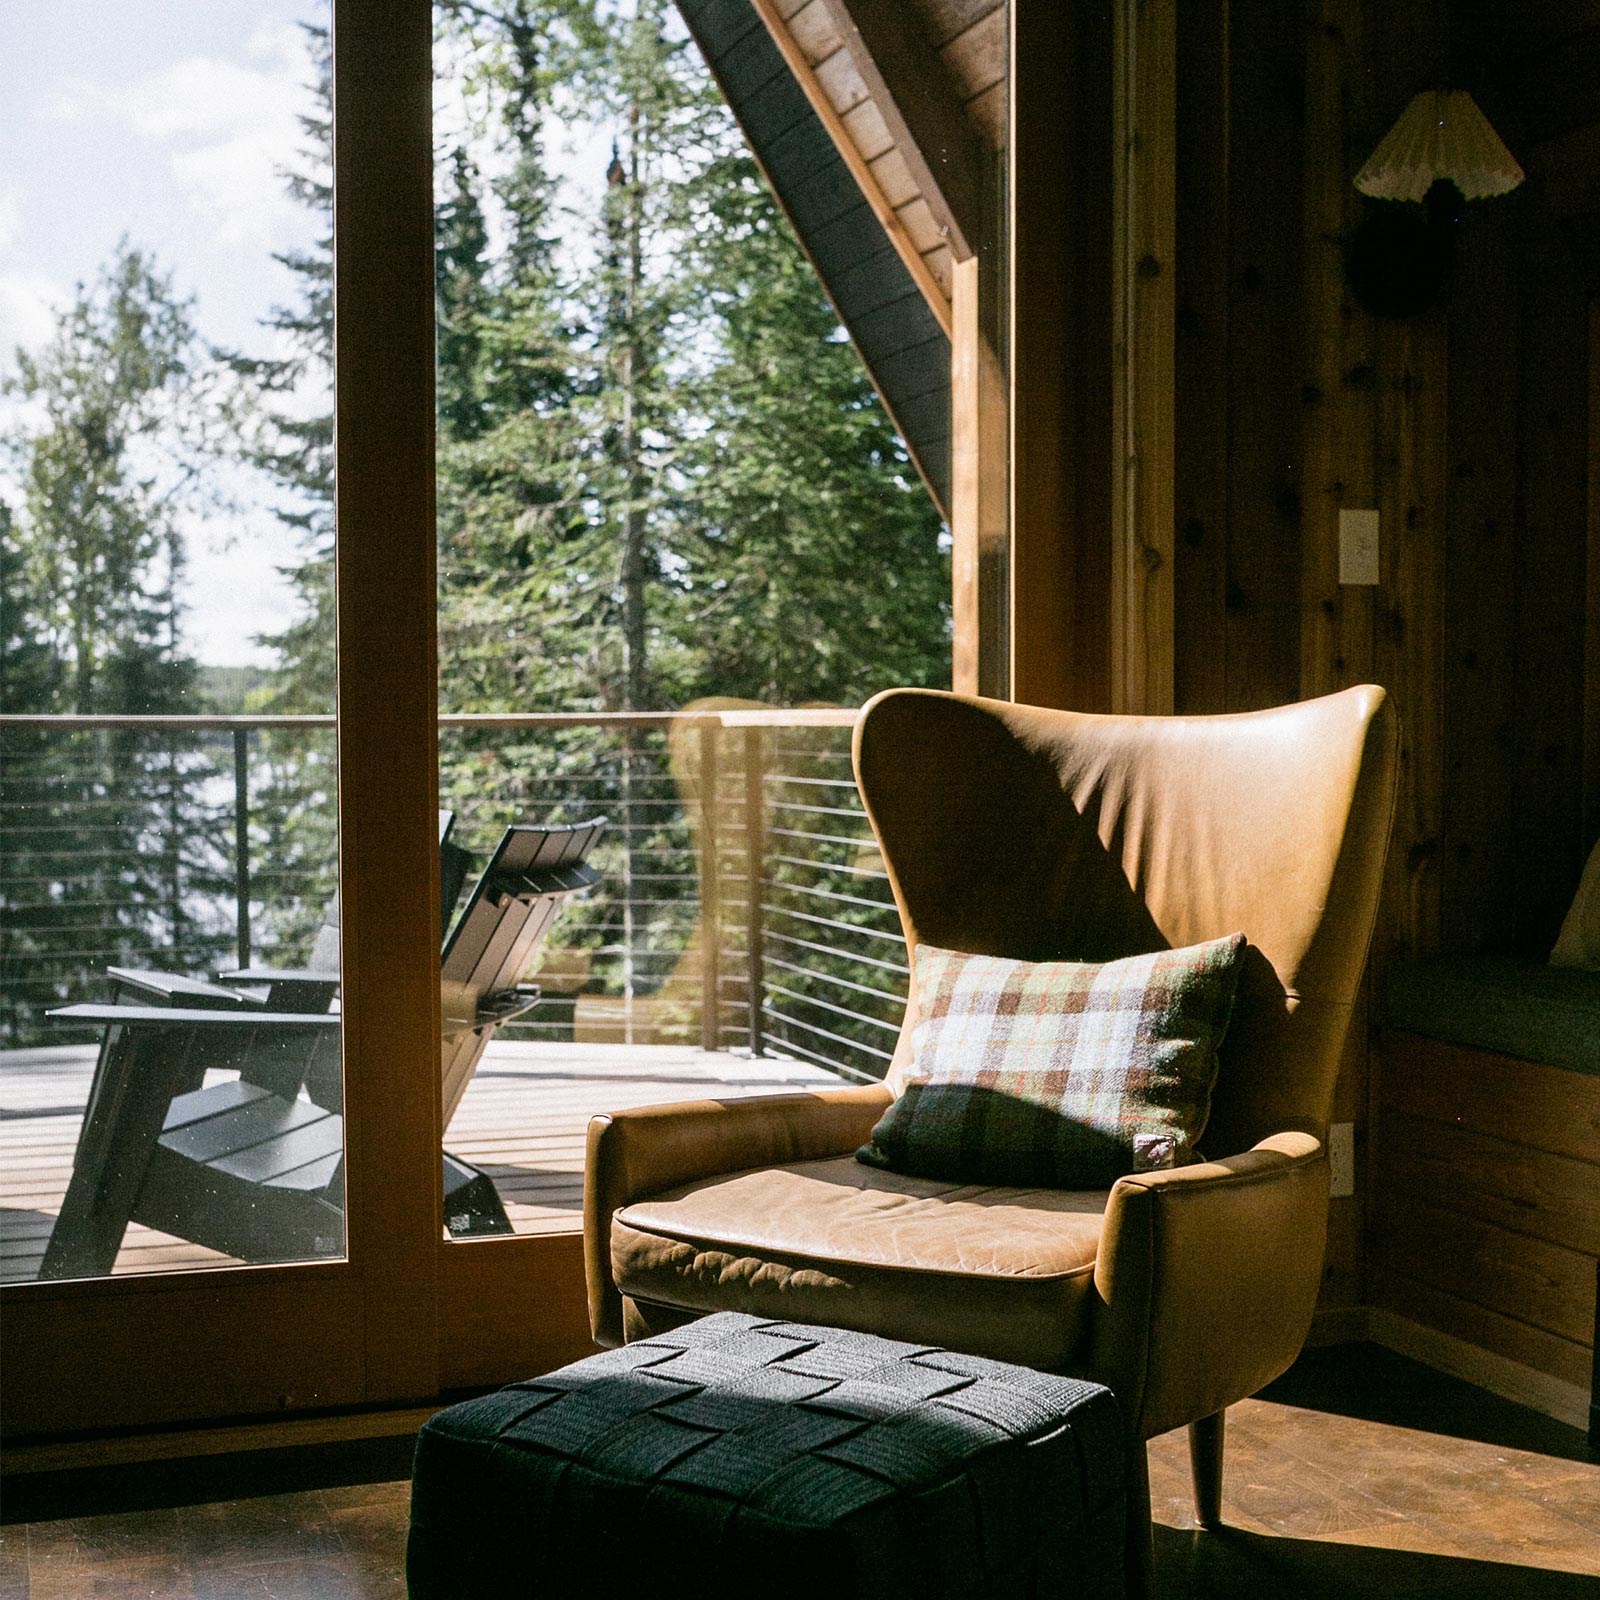 A sitting area overlooking Devil Track Lake of Melissa Coleman’s The Minne Stuga Northwoods cabin, featuring a Marvin Ultimate Sliding French Door. 